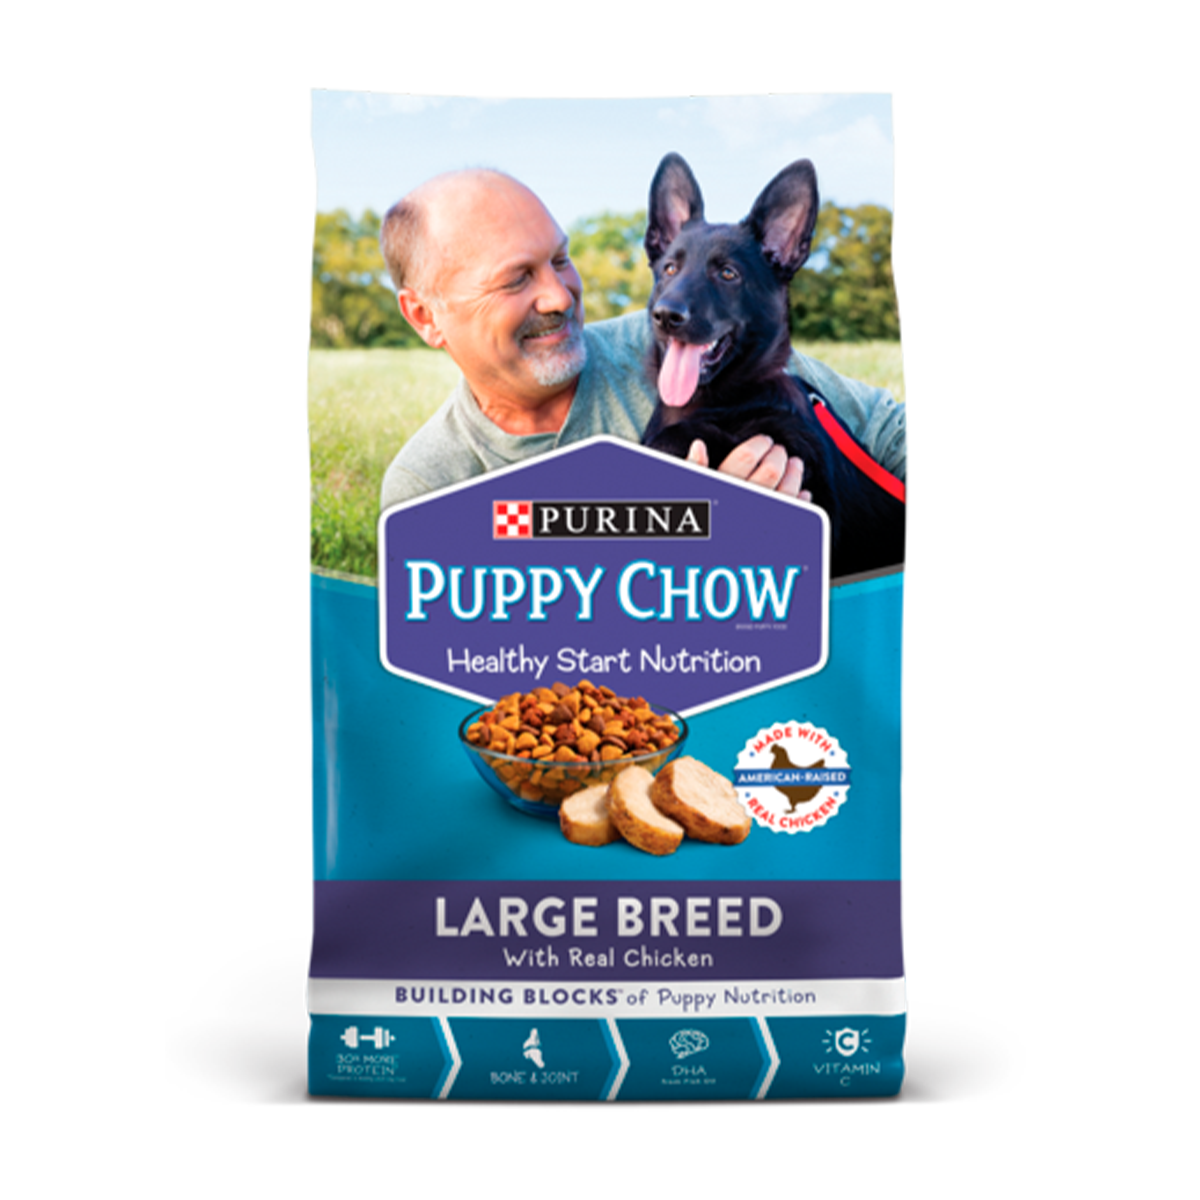 purina-dog-chow-healthy-start-nutrition-large-breed.png